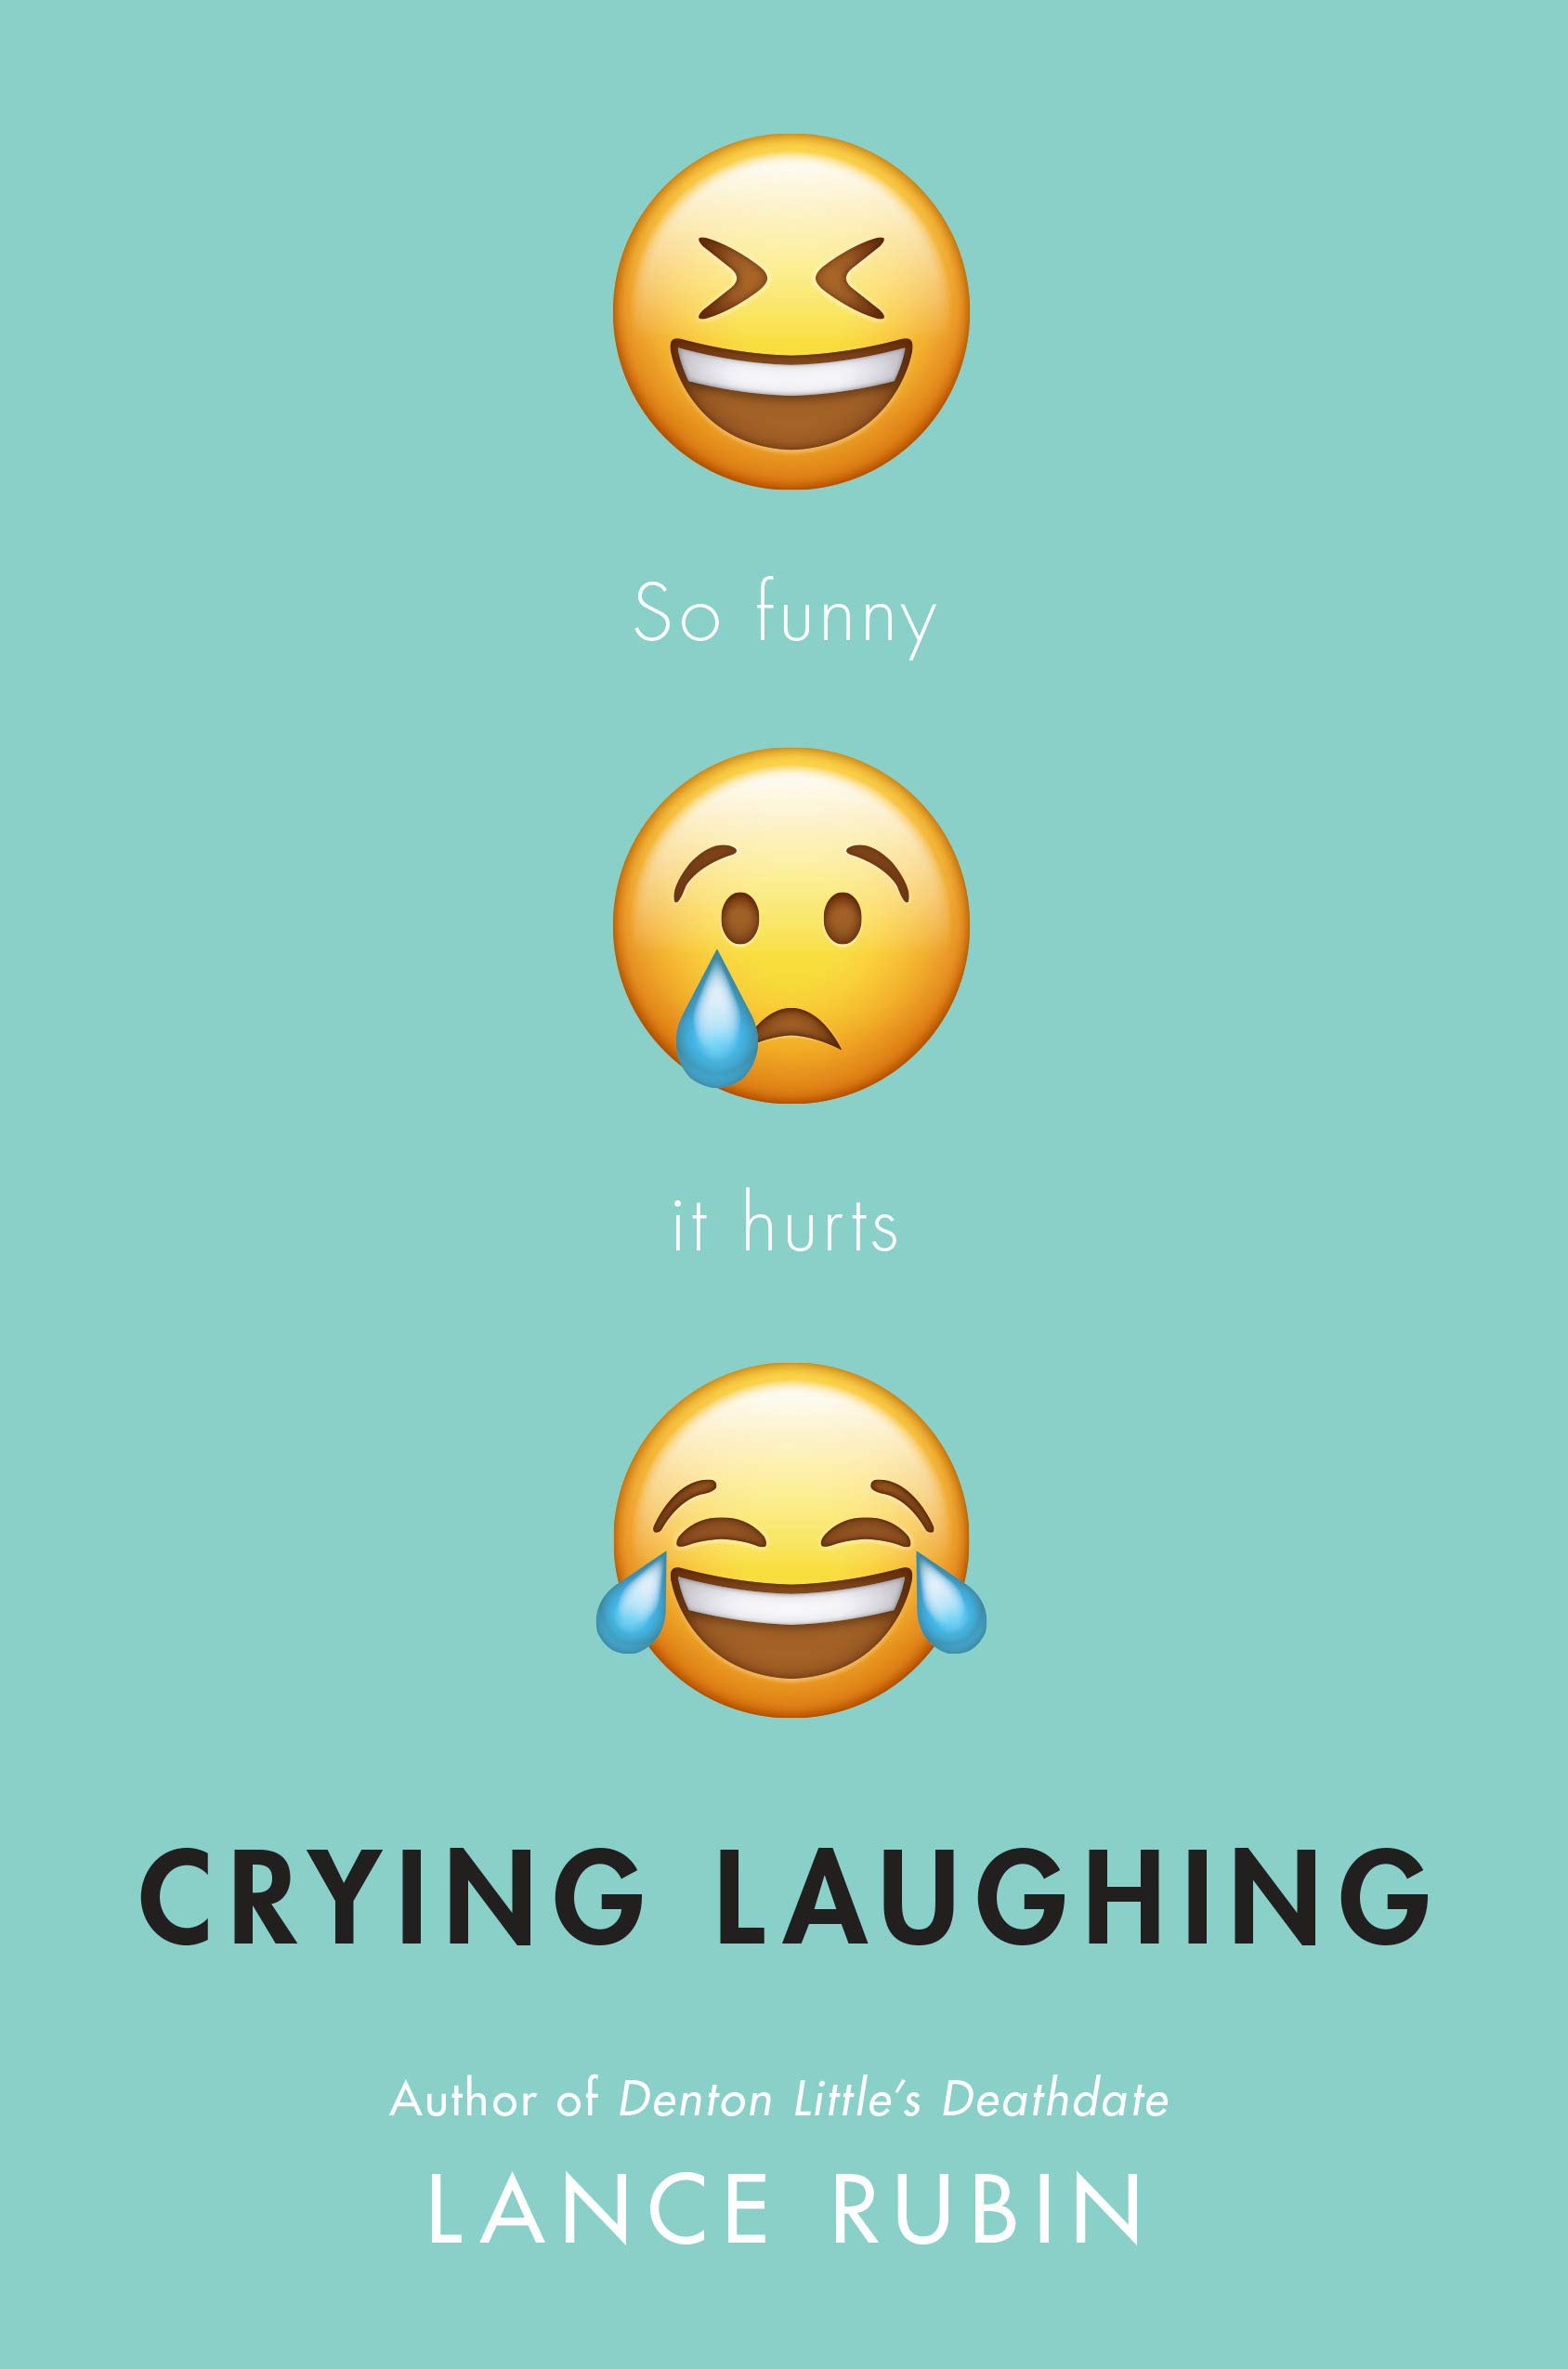 Blog Tour: Crying Laughing by Lance Rubin (Guest Post + Giveaway!)